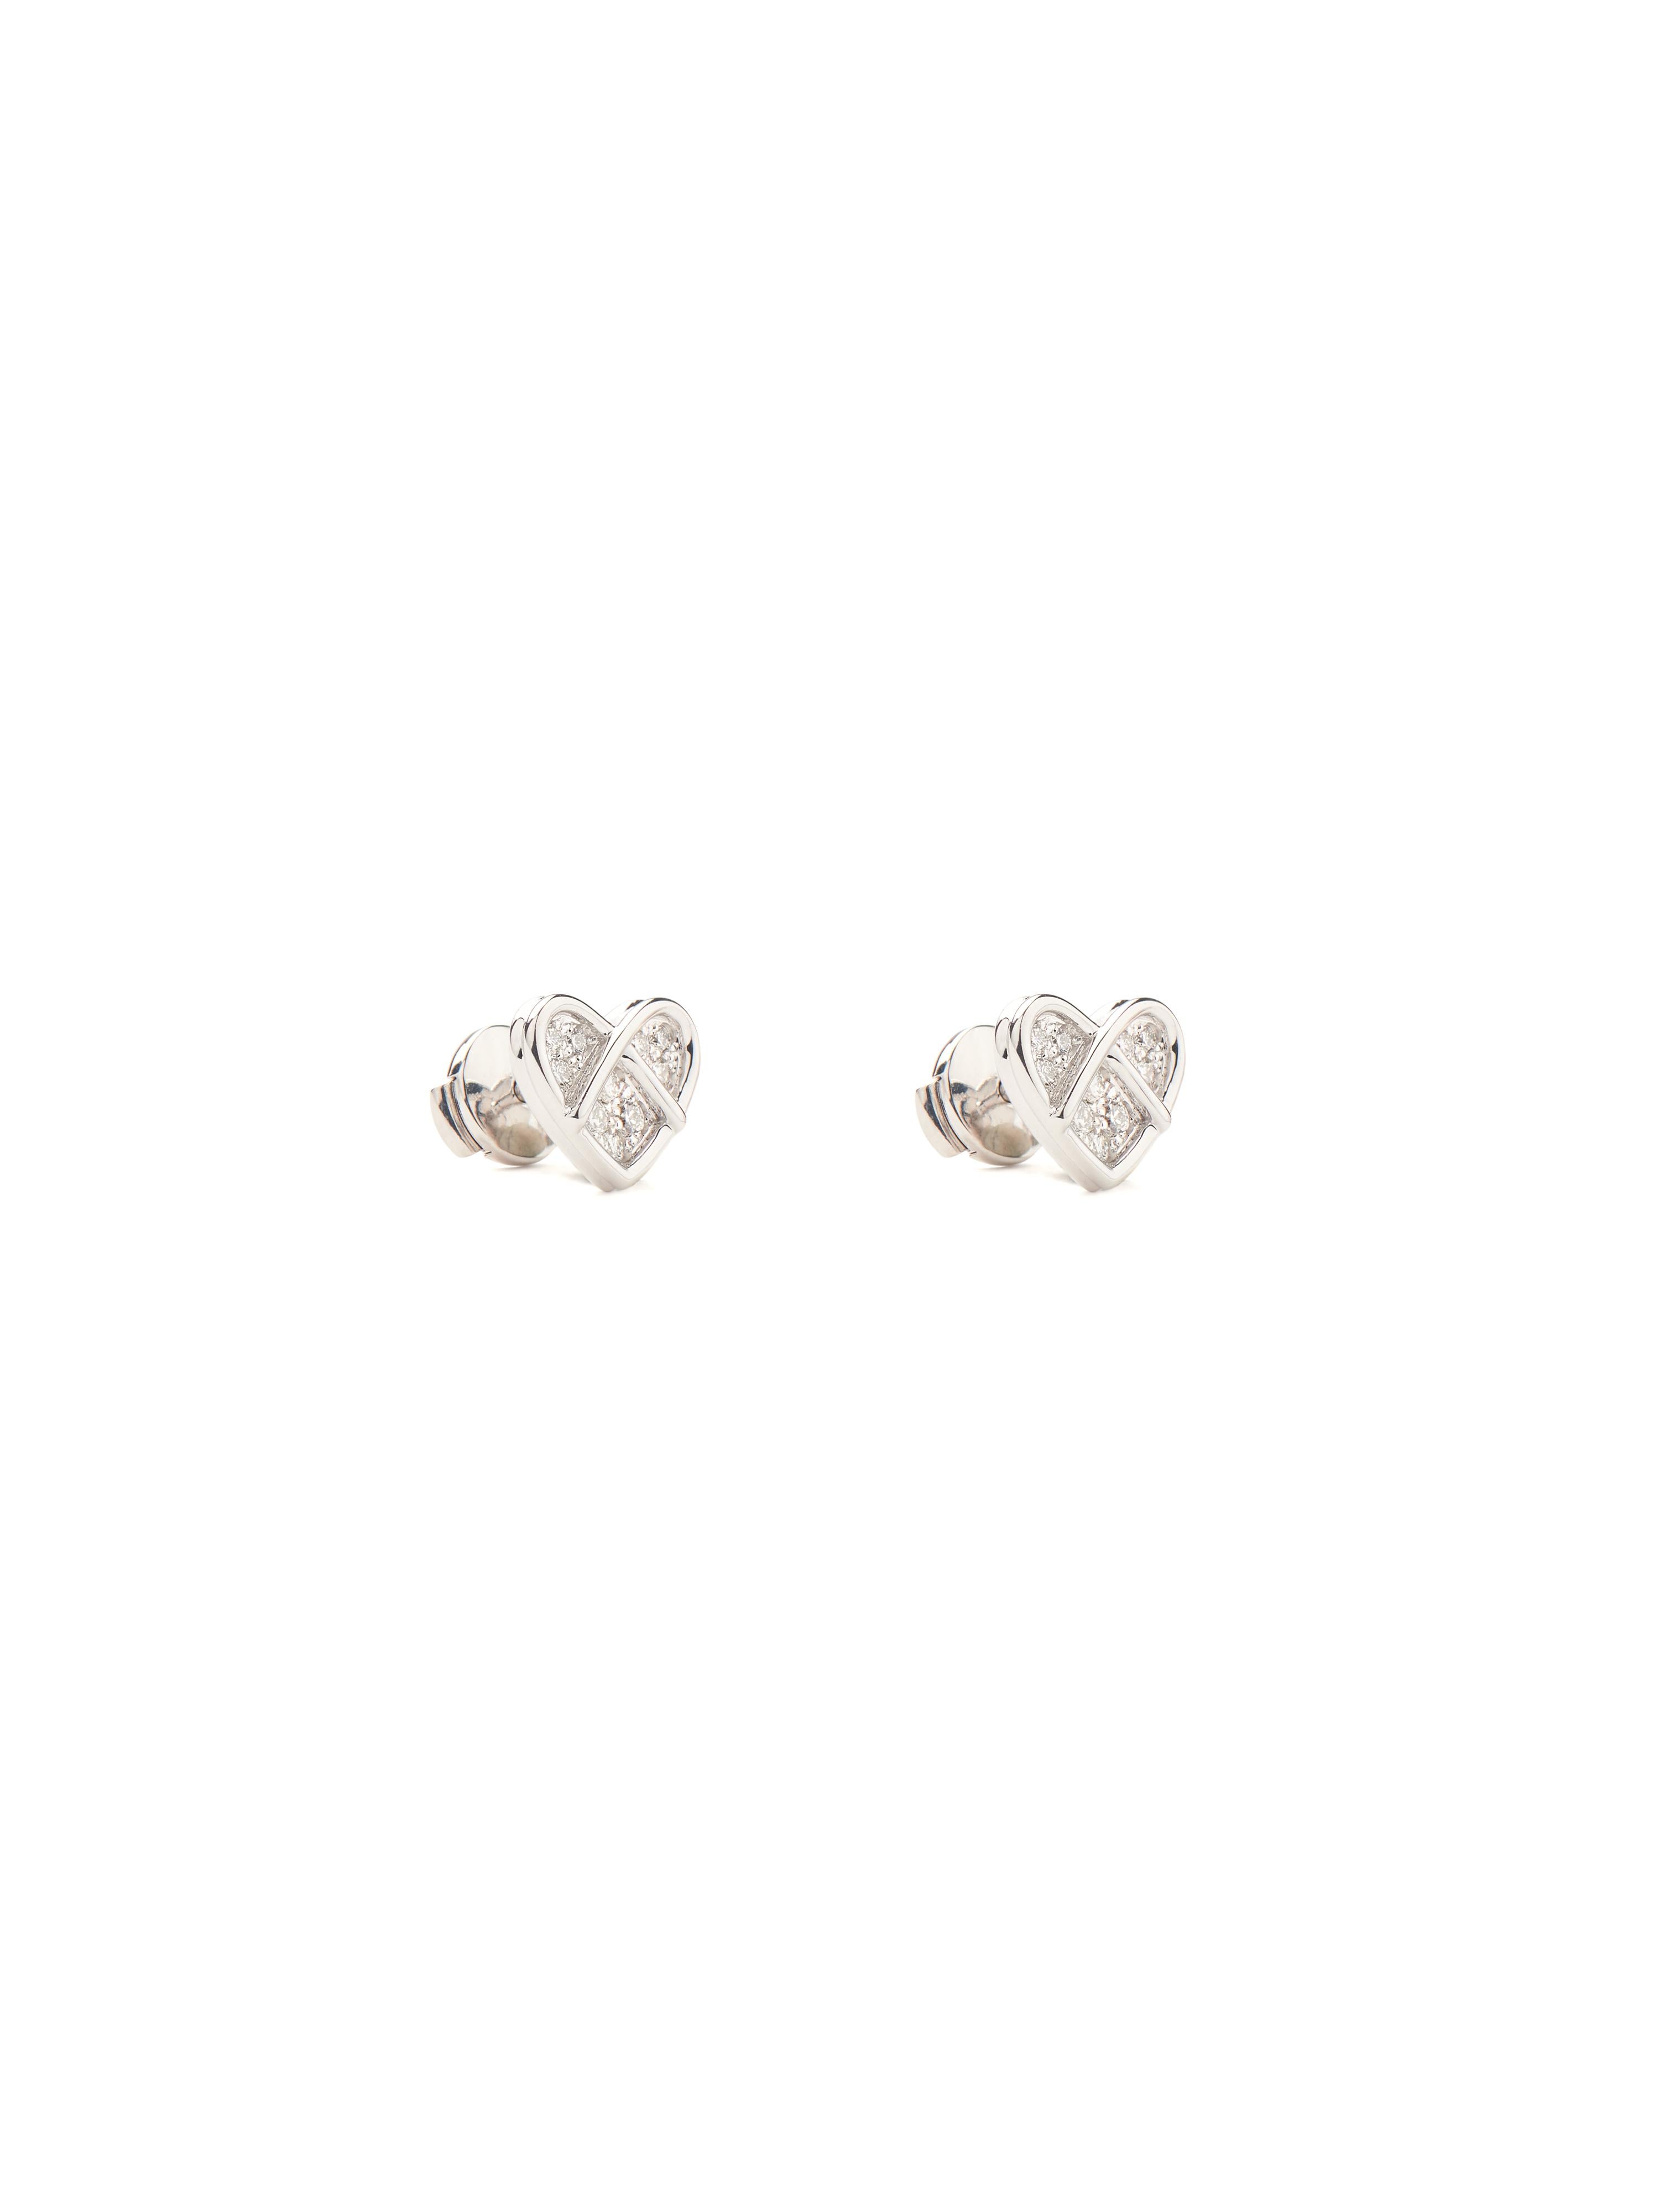 L'Attrape-Coeur collection plays with the colors of love. Its rounded gold borders embrace the purity of diamonds, the nuances of opal, turquoise or lapis lazuli.

L'Attrape Coeur earrings in white gold with diamonds.

Gold weight : 3.2 g
Diamonds :